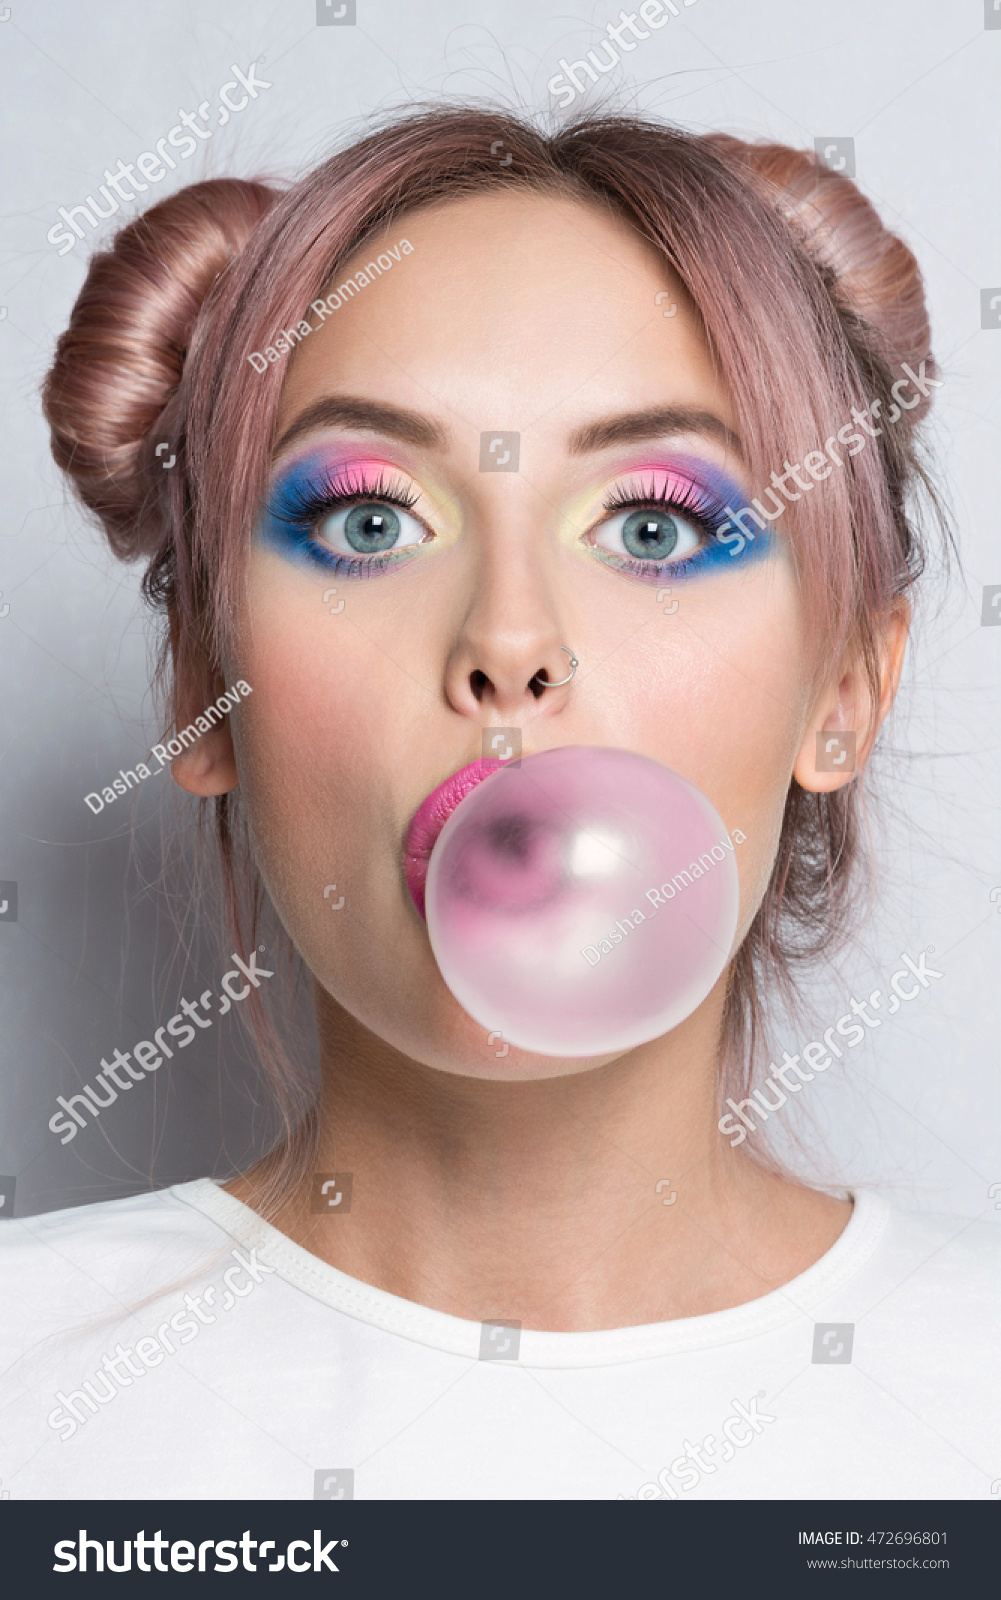 bigg guy recommends Woman Blowing Bubble Gum